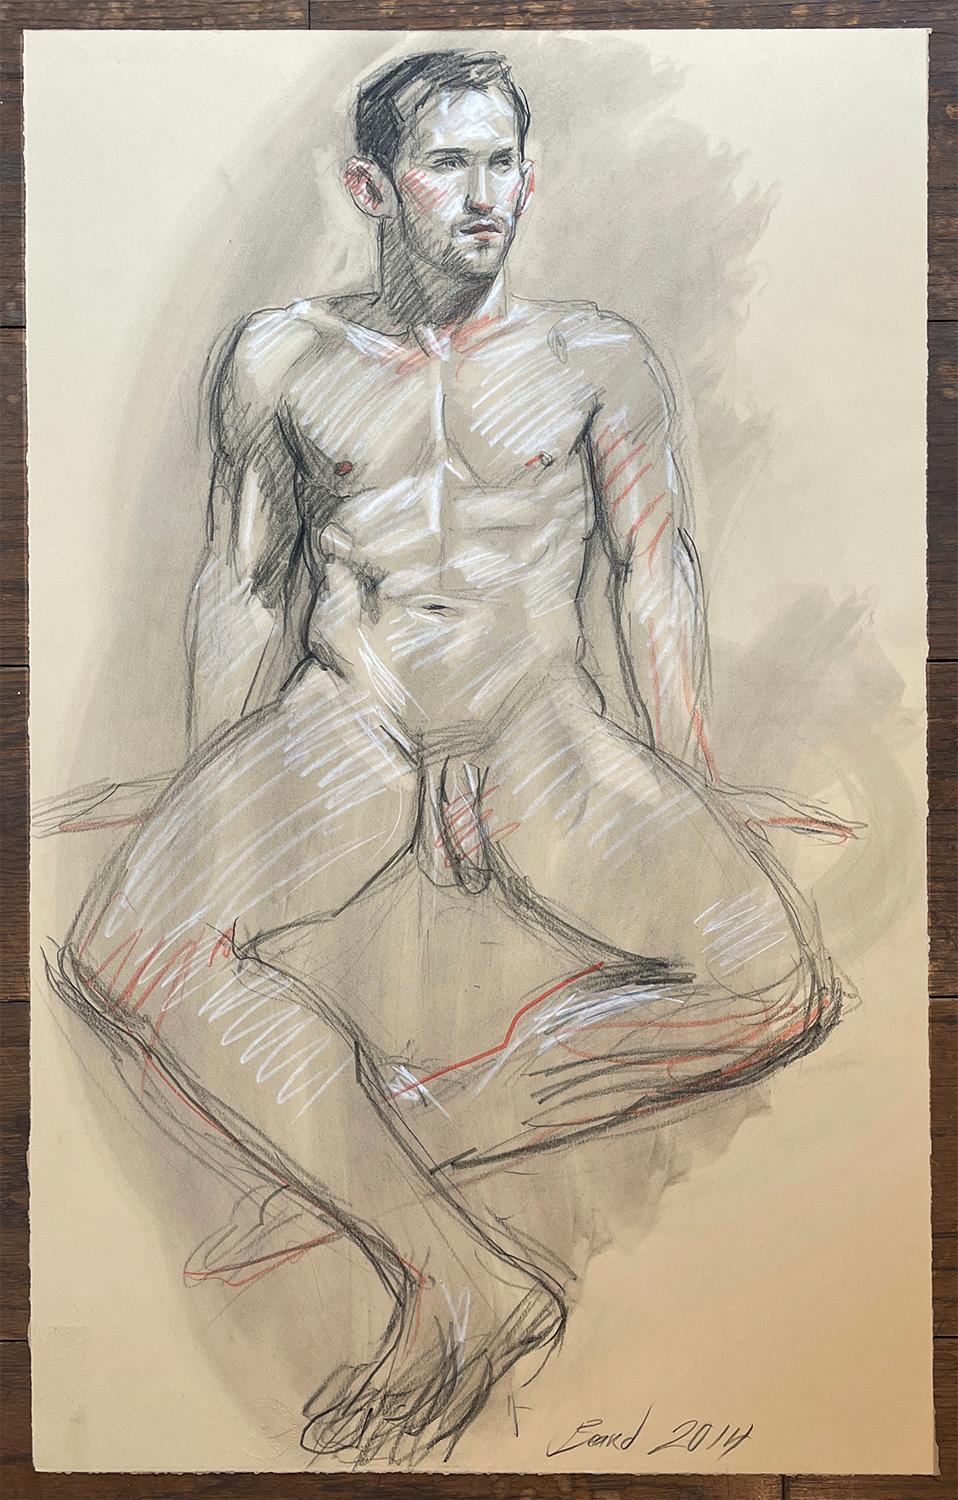 MB 702 (Contemporary Life Drawing of Male Nude by Mark Beard)
graphite, Conte crayon and charcoal on Arches paper
30 x 19 inches unframed

Contemporary figurative life study drawing of a male nude in graphite, charcoal and Conte crayon on Arches